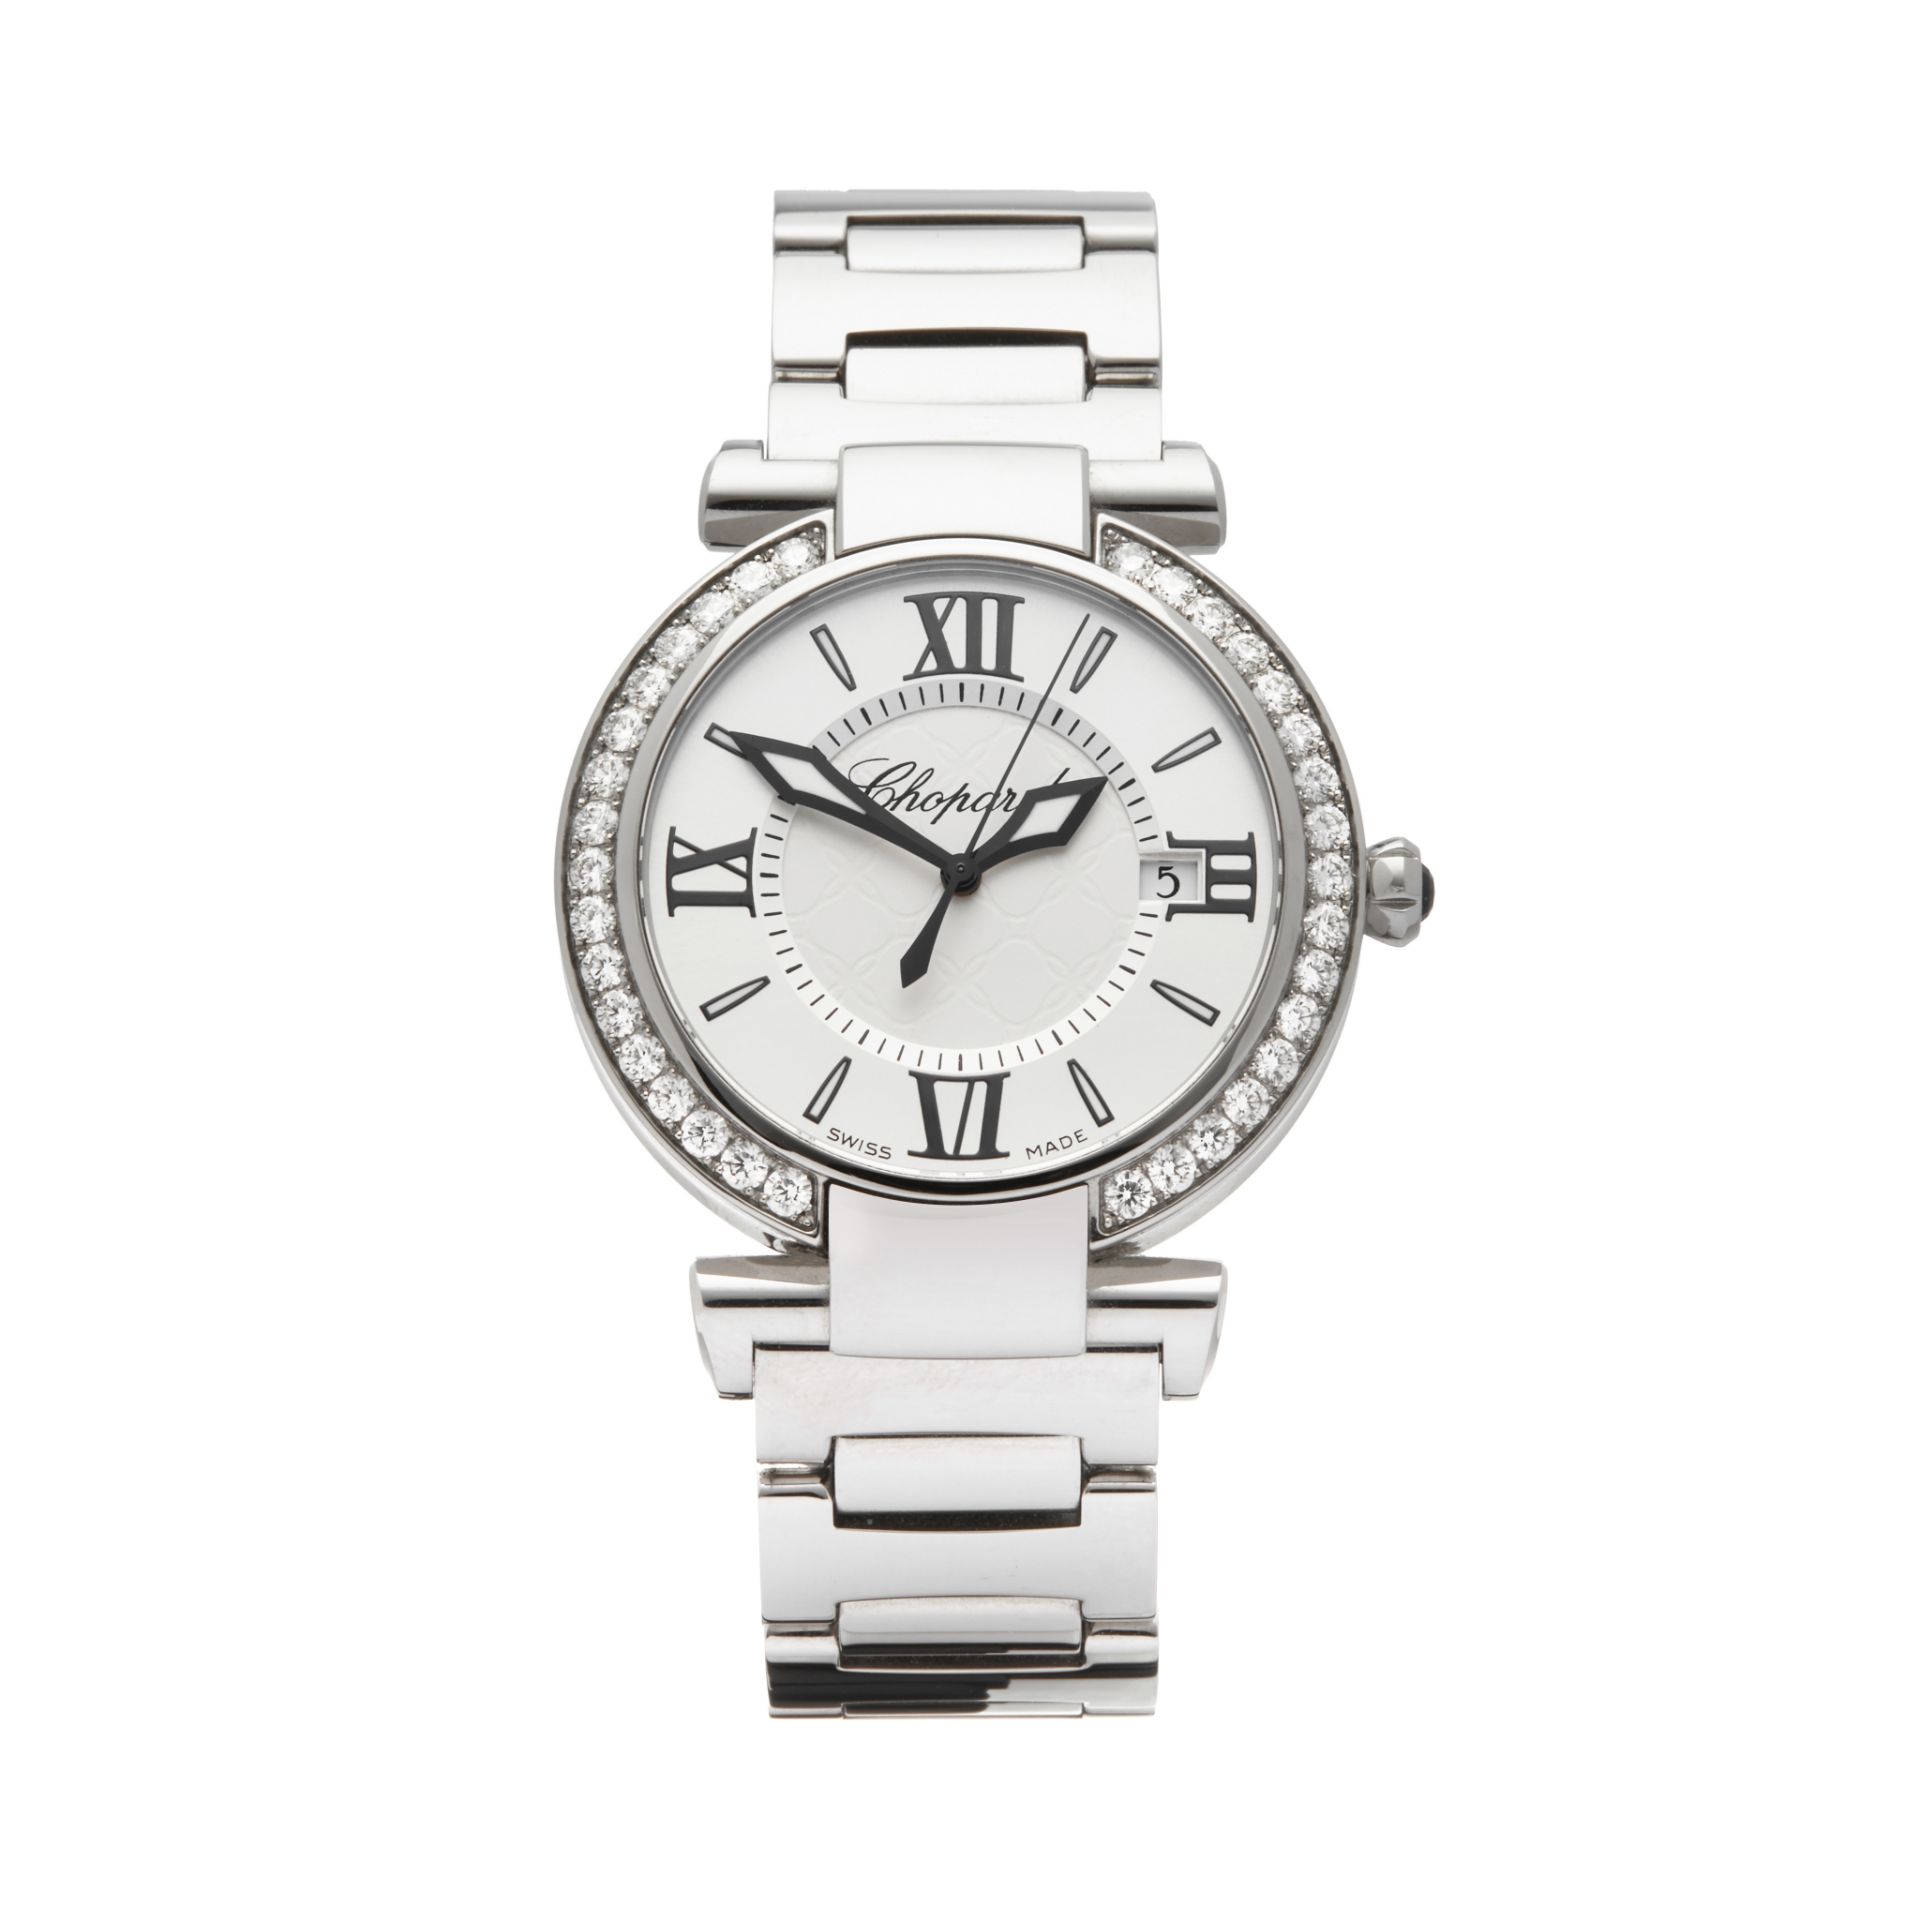 Chopard Imperiale Stainless Steel - 388532-3004 - Image 2 of 8